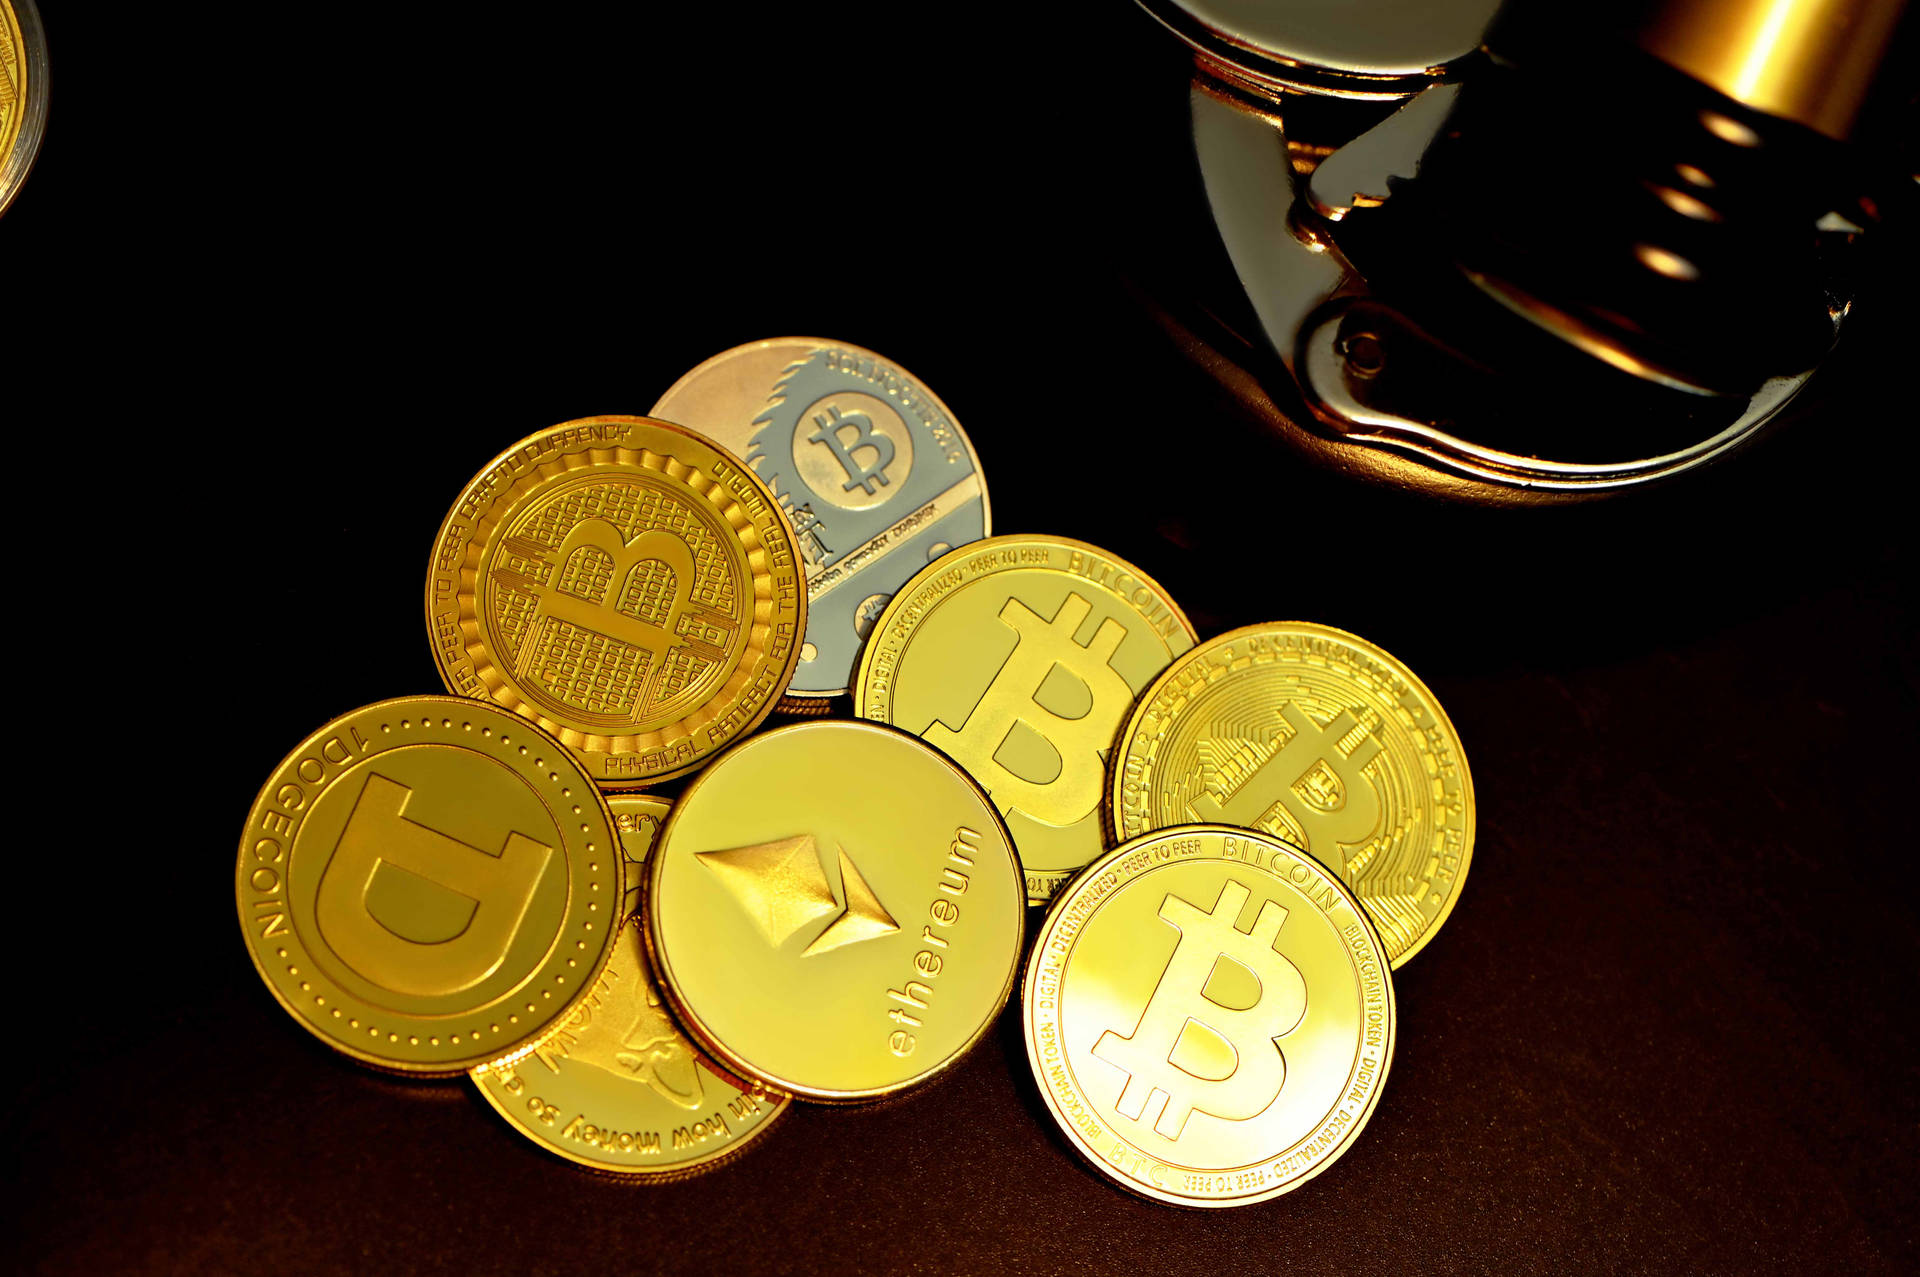 Shiny Cryptocurrency Coins Picture